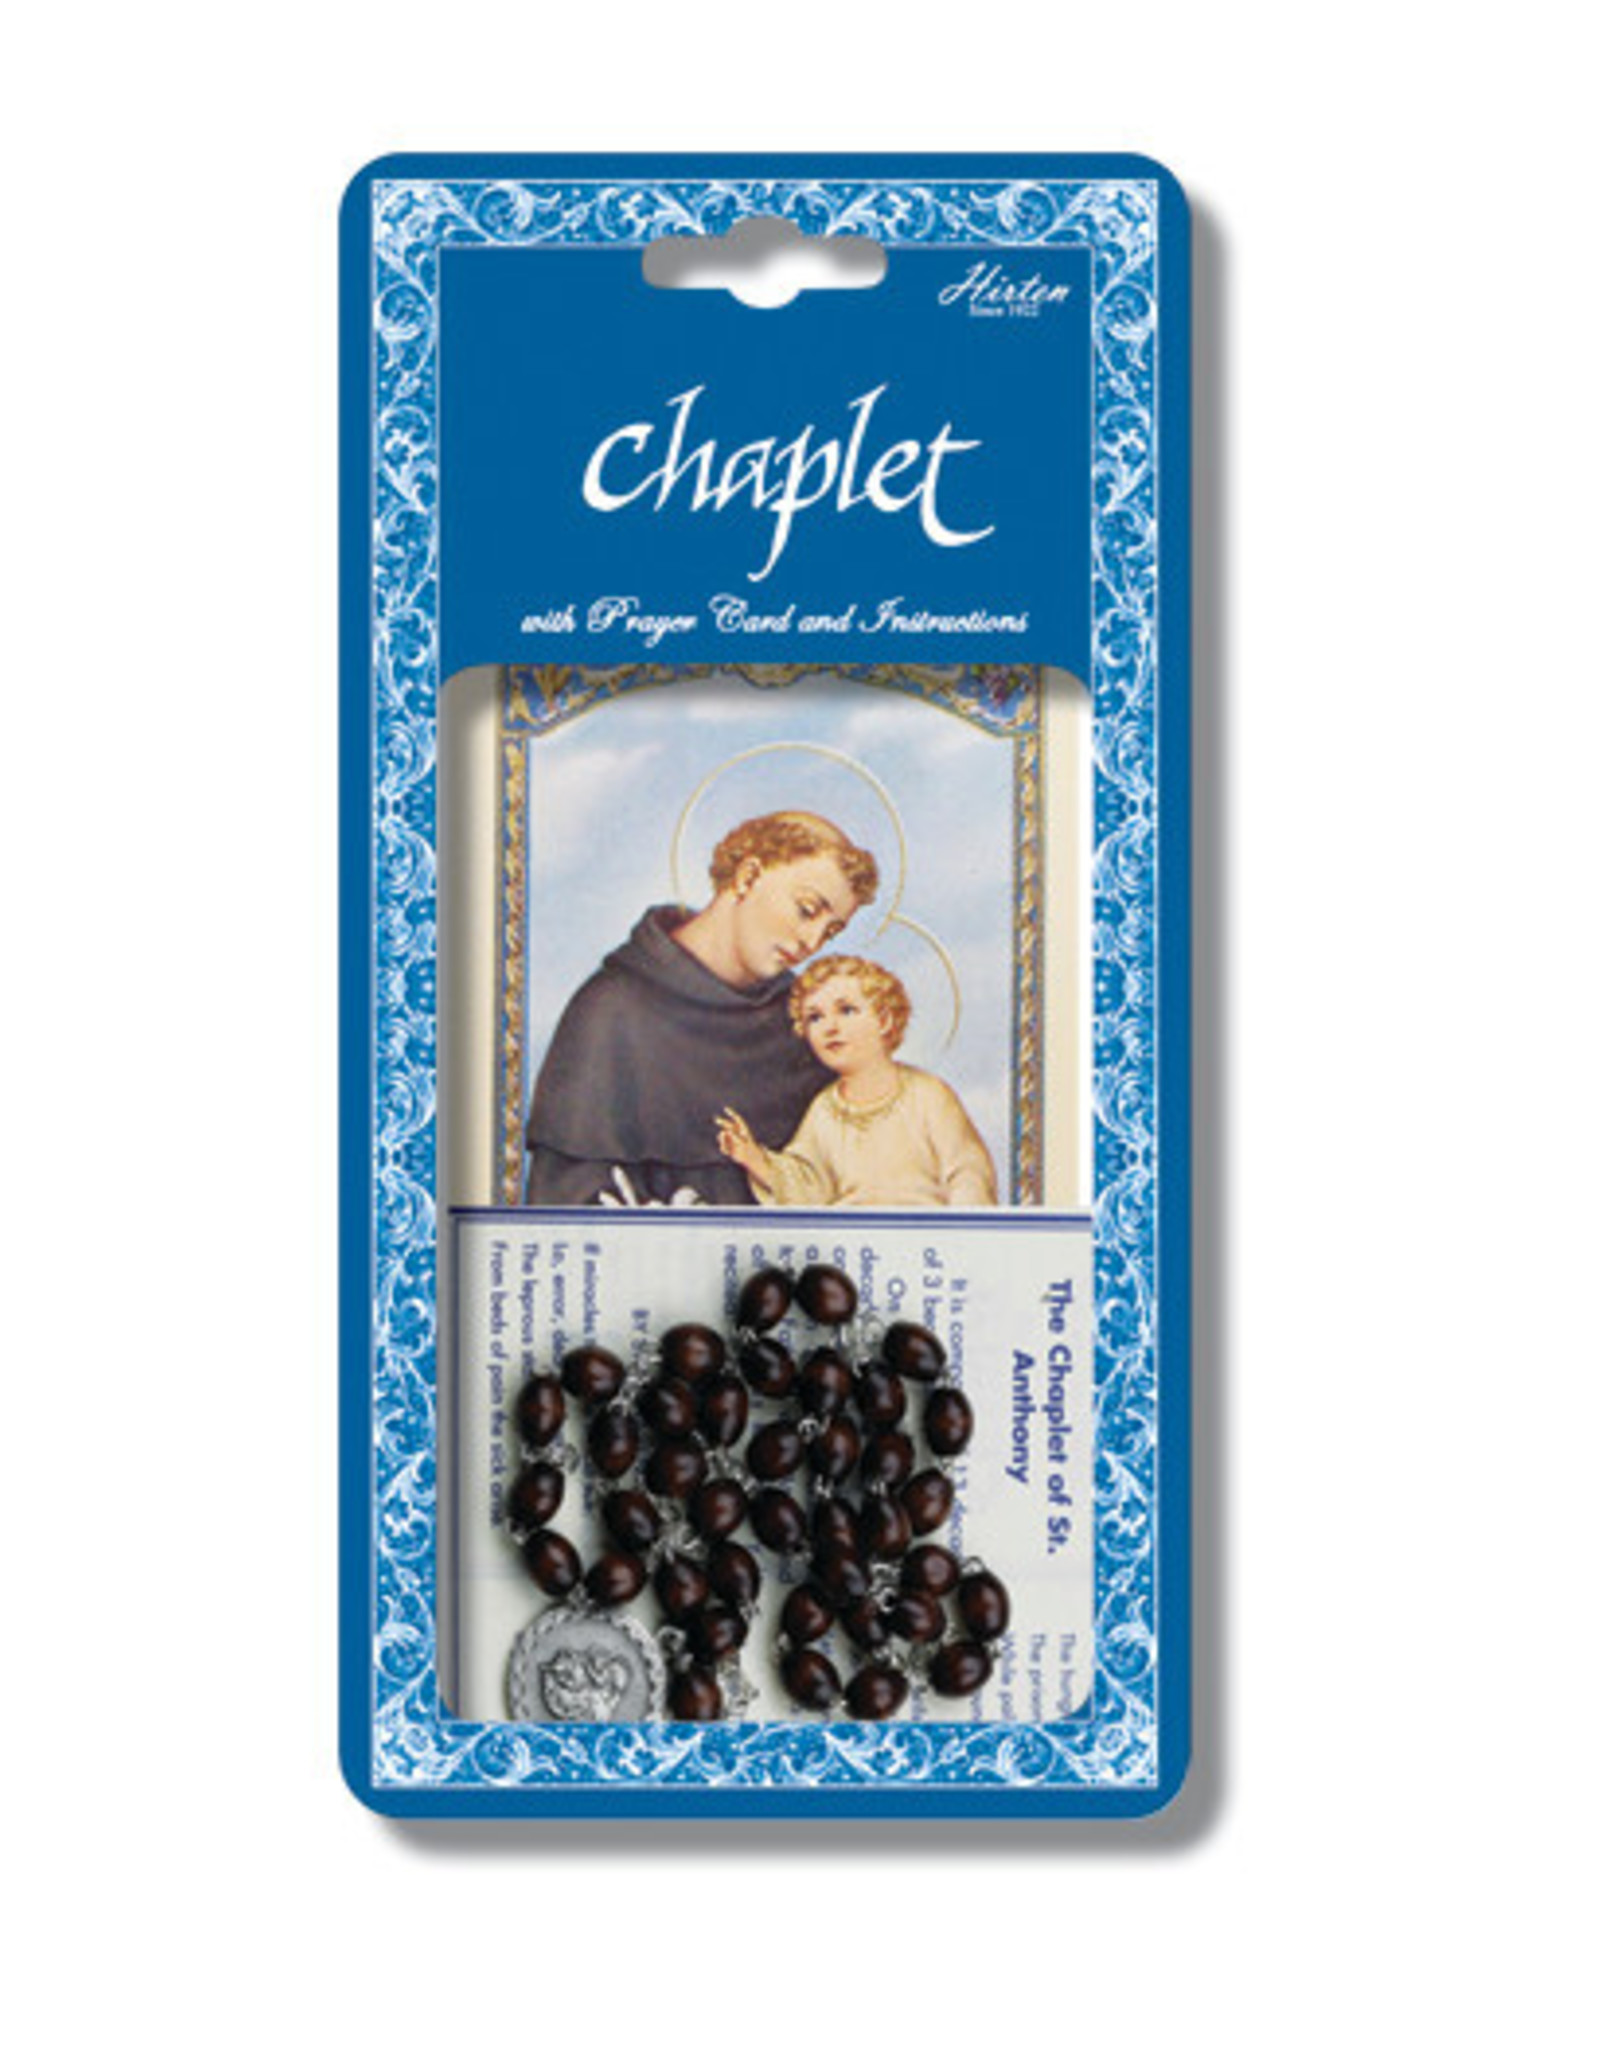 Hirten St. Anthony Chaplet with Prayer Card and Instructions